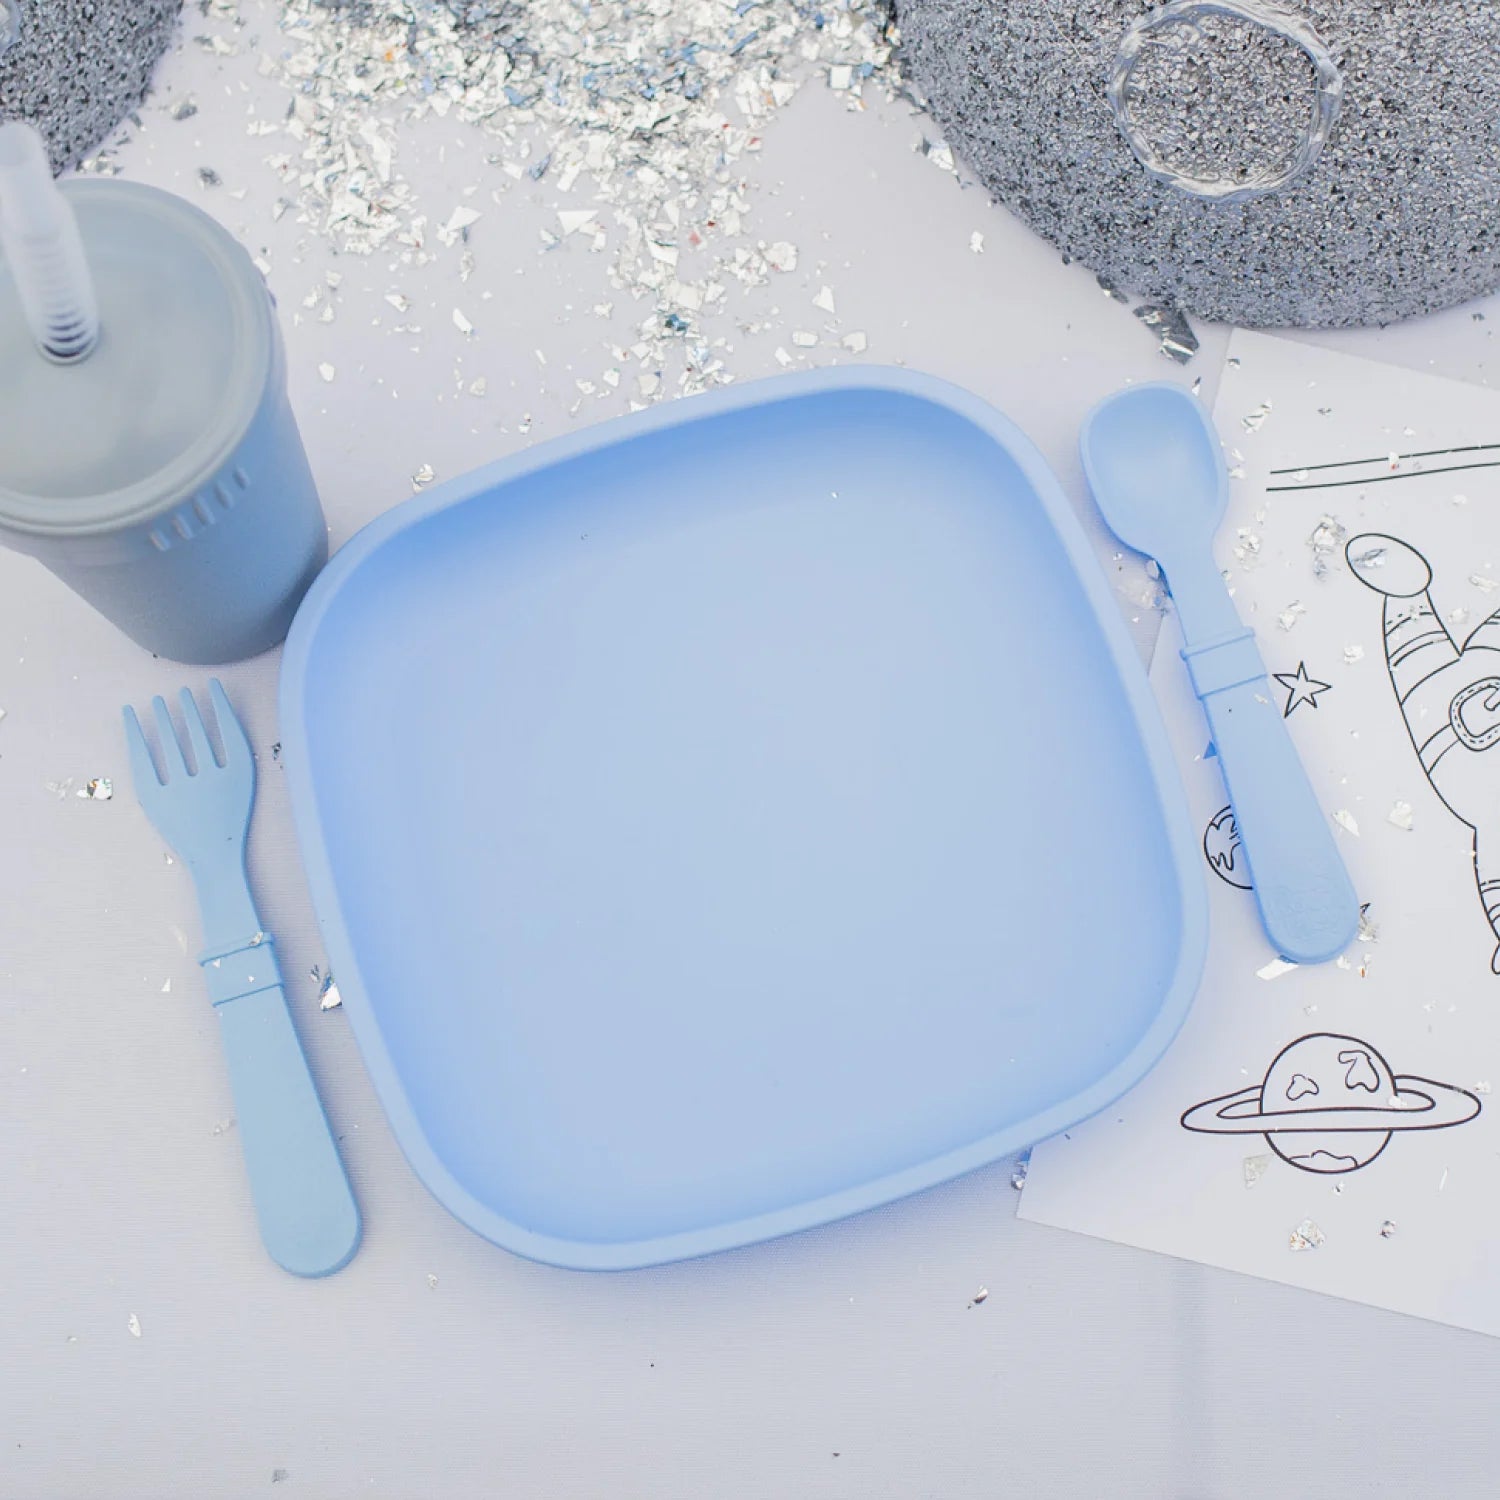 Re-Play Utensil Set with plate